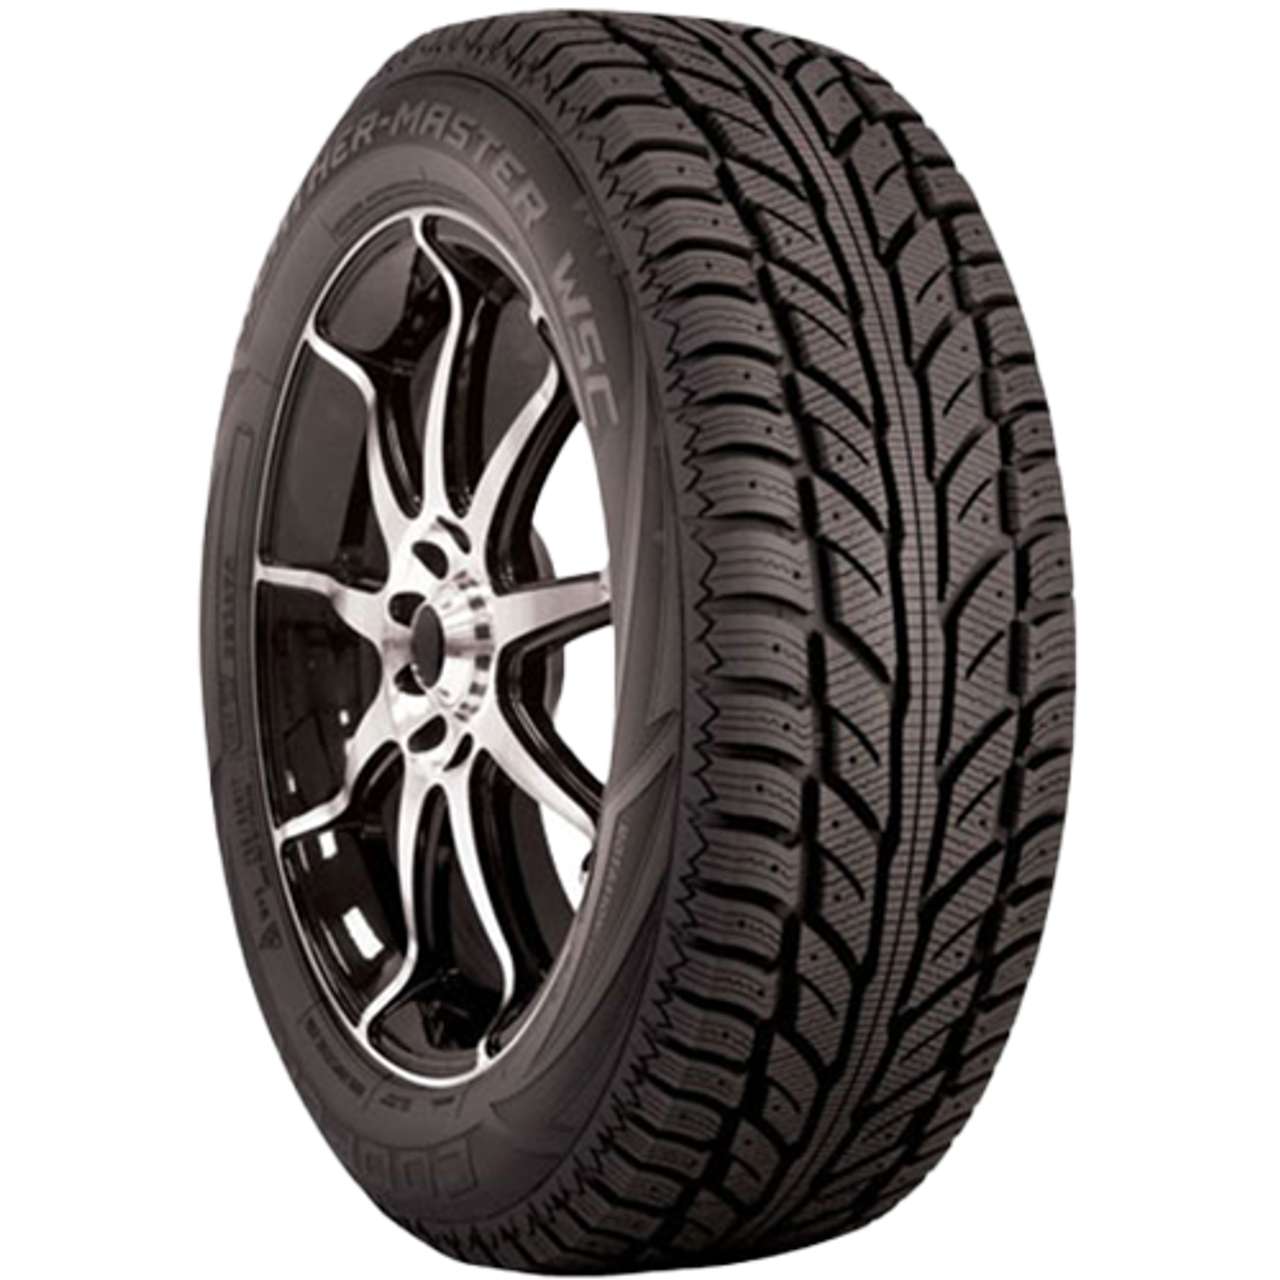 COOPER WEATHERMASTER WSC 225/75R16 104T STUDDABLE BSW